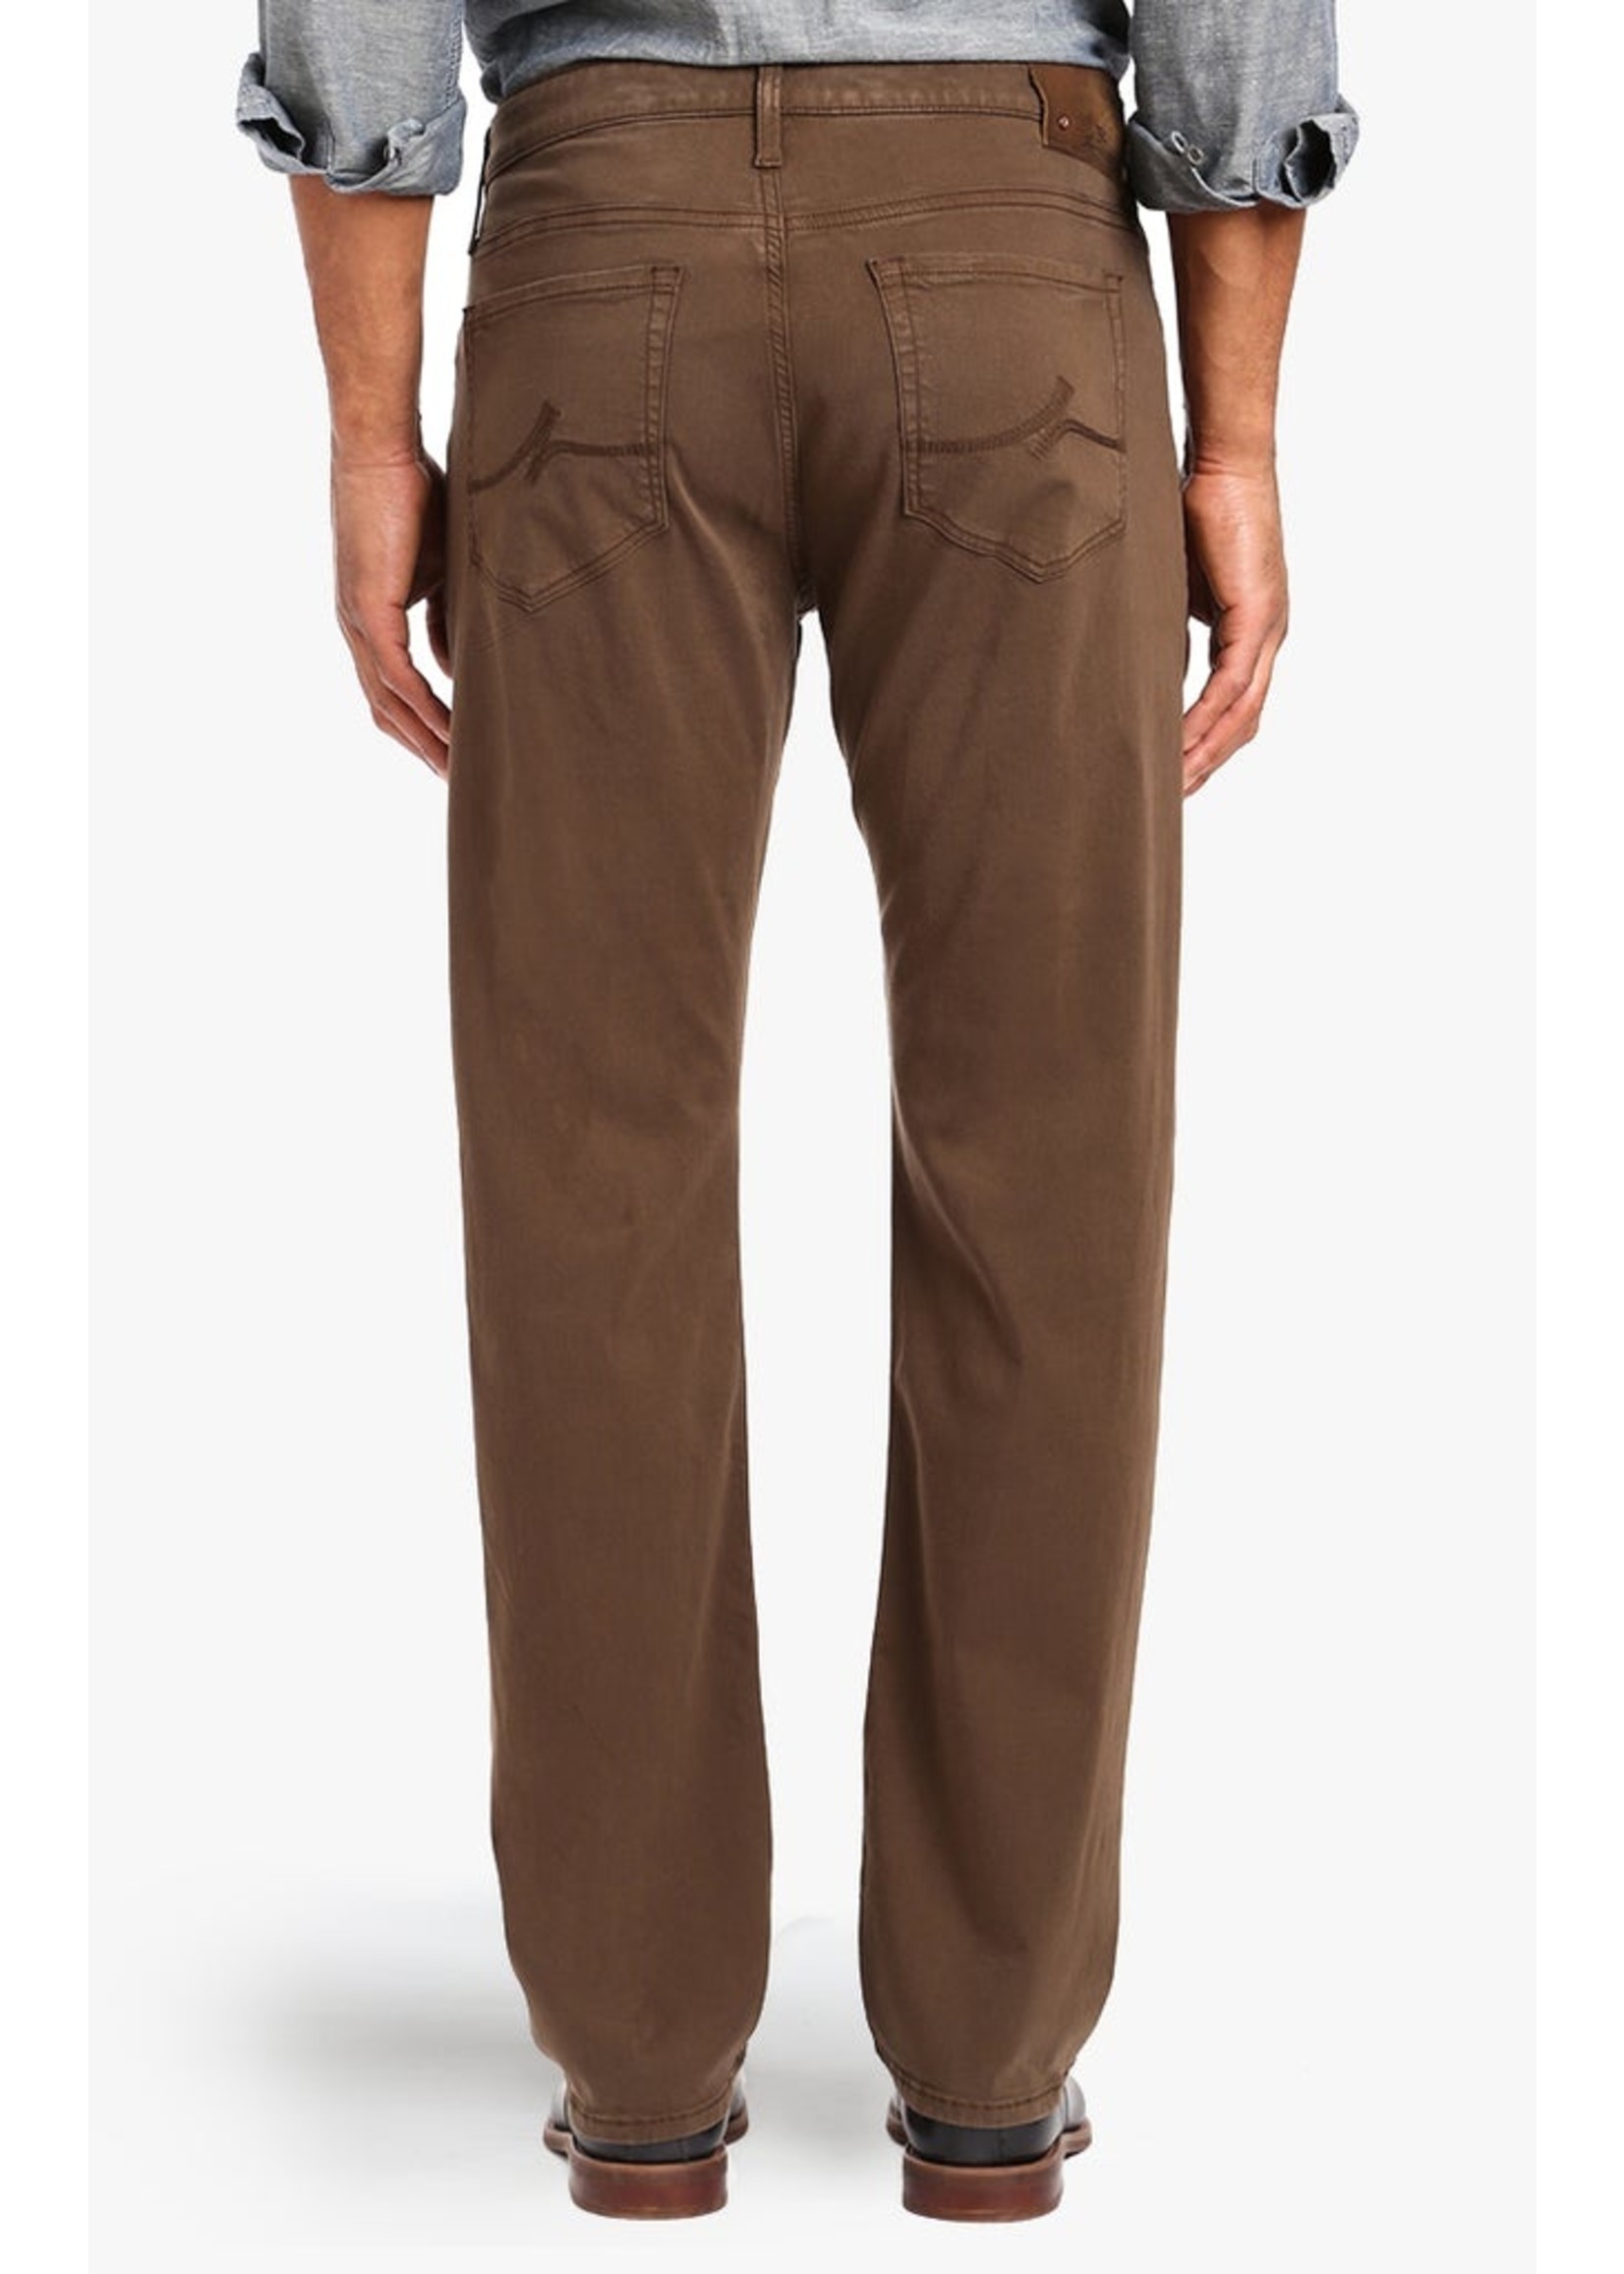 34 HERITAGE 'Charisma' Relaxed Straight Pants in Cafe Twill